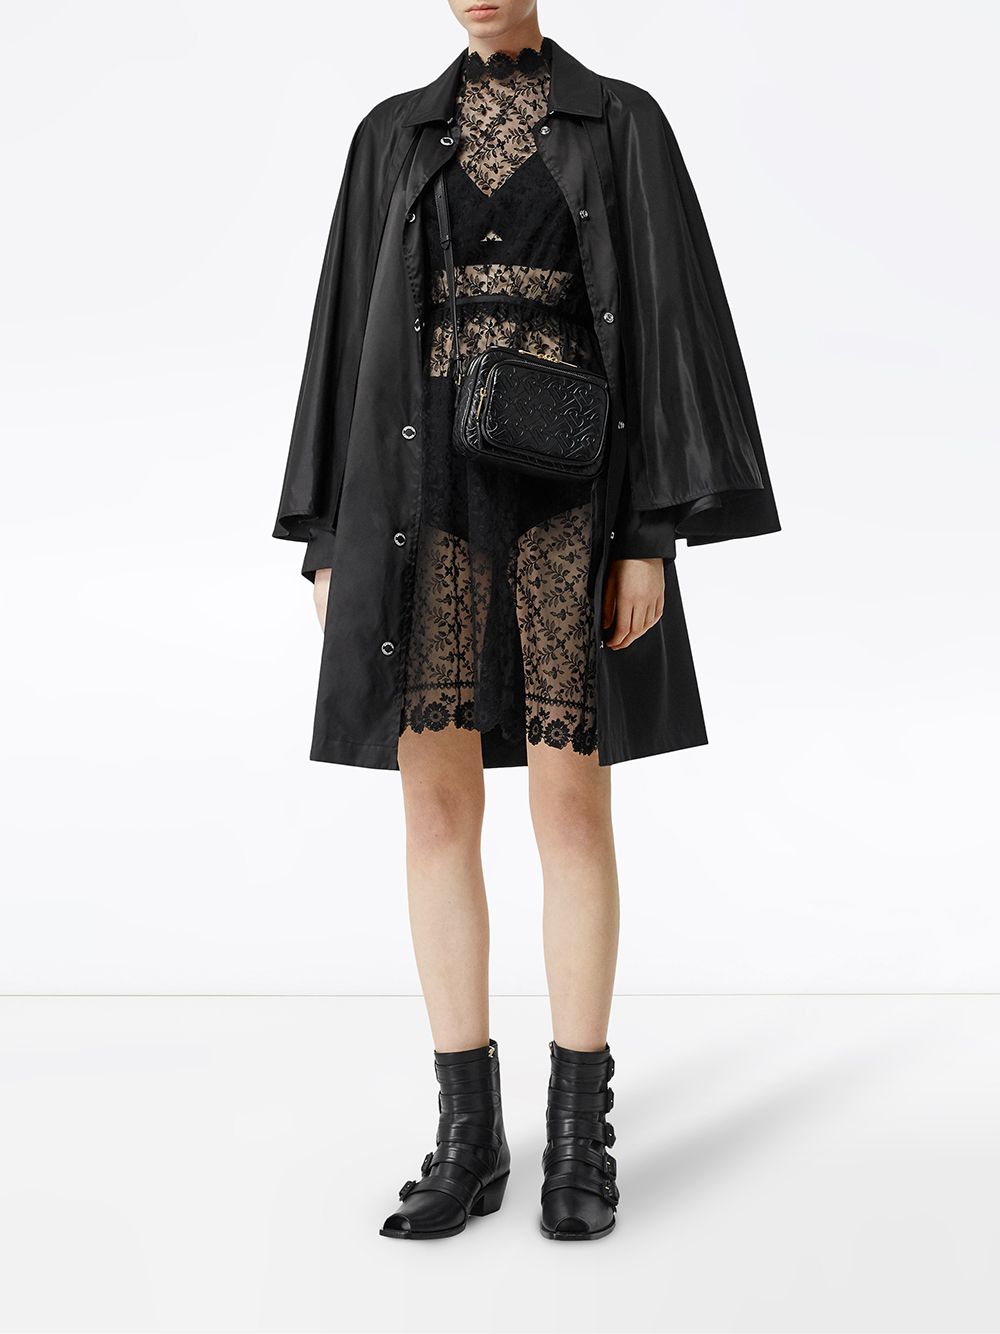 Burberry Floral Embroidered Tulle Dress - Farfetch